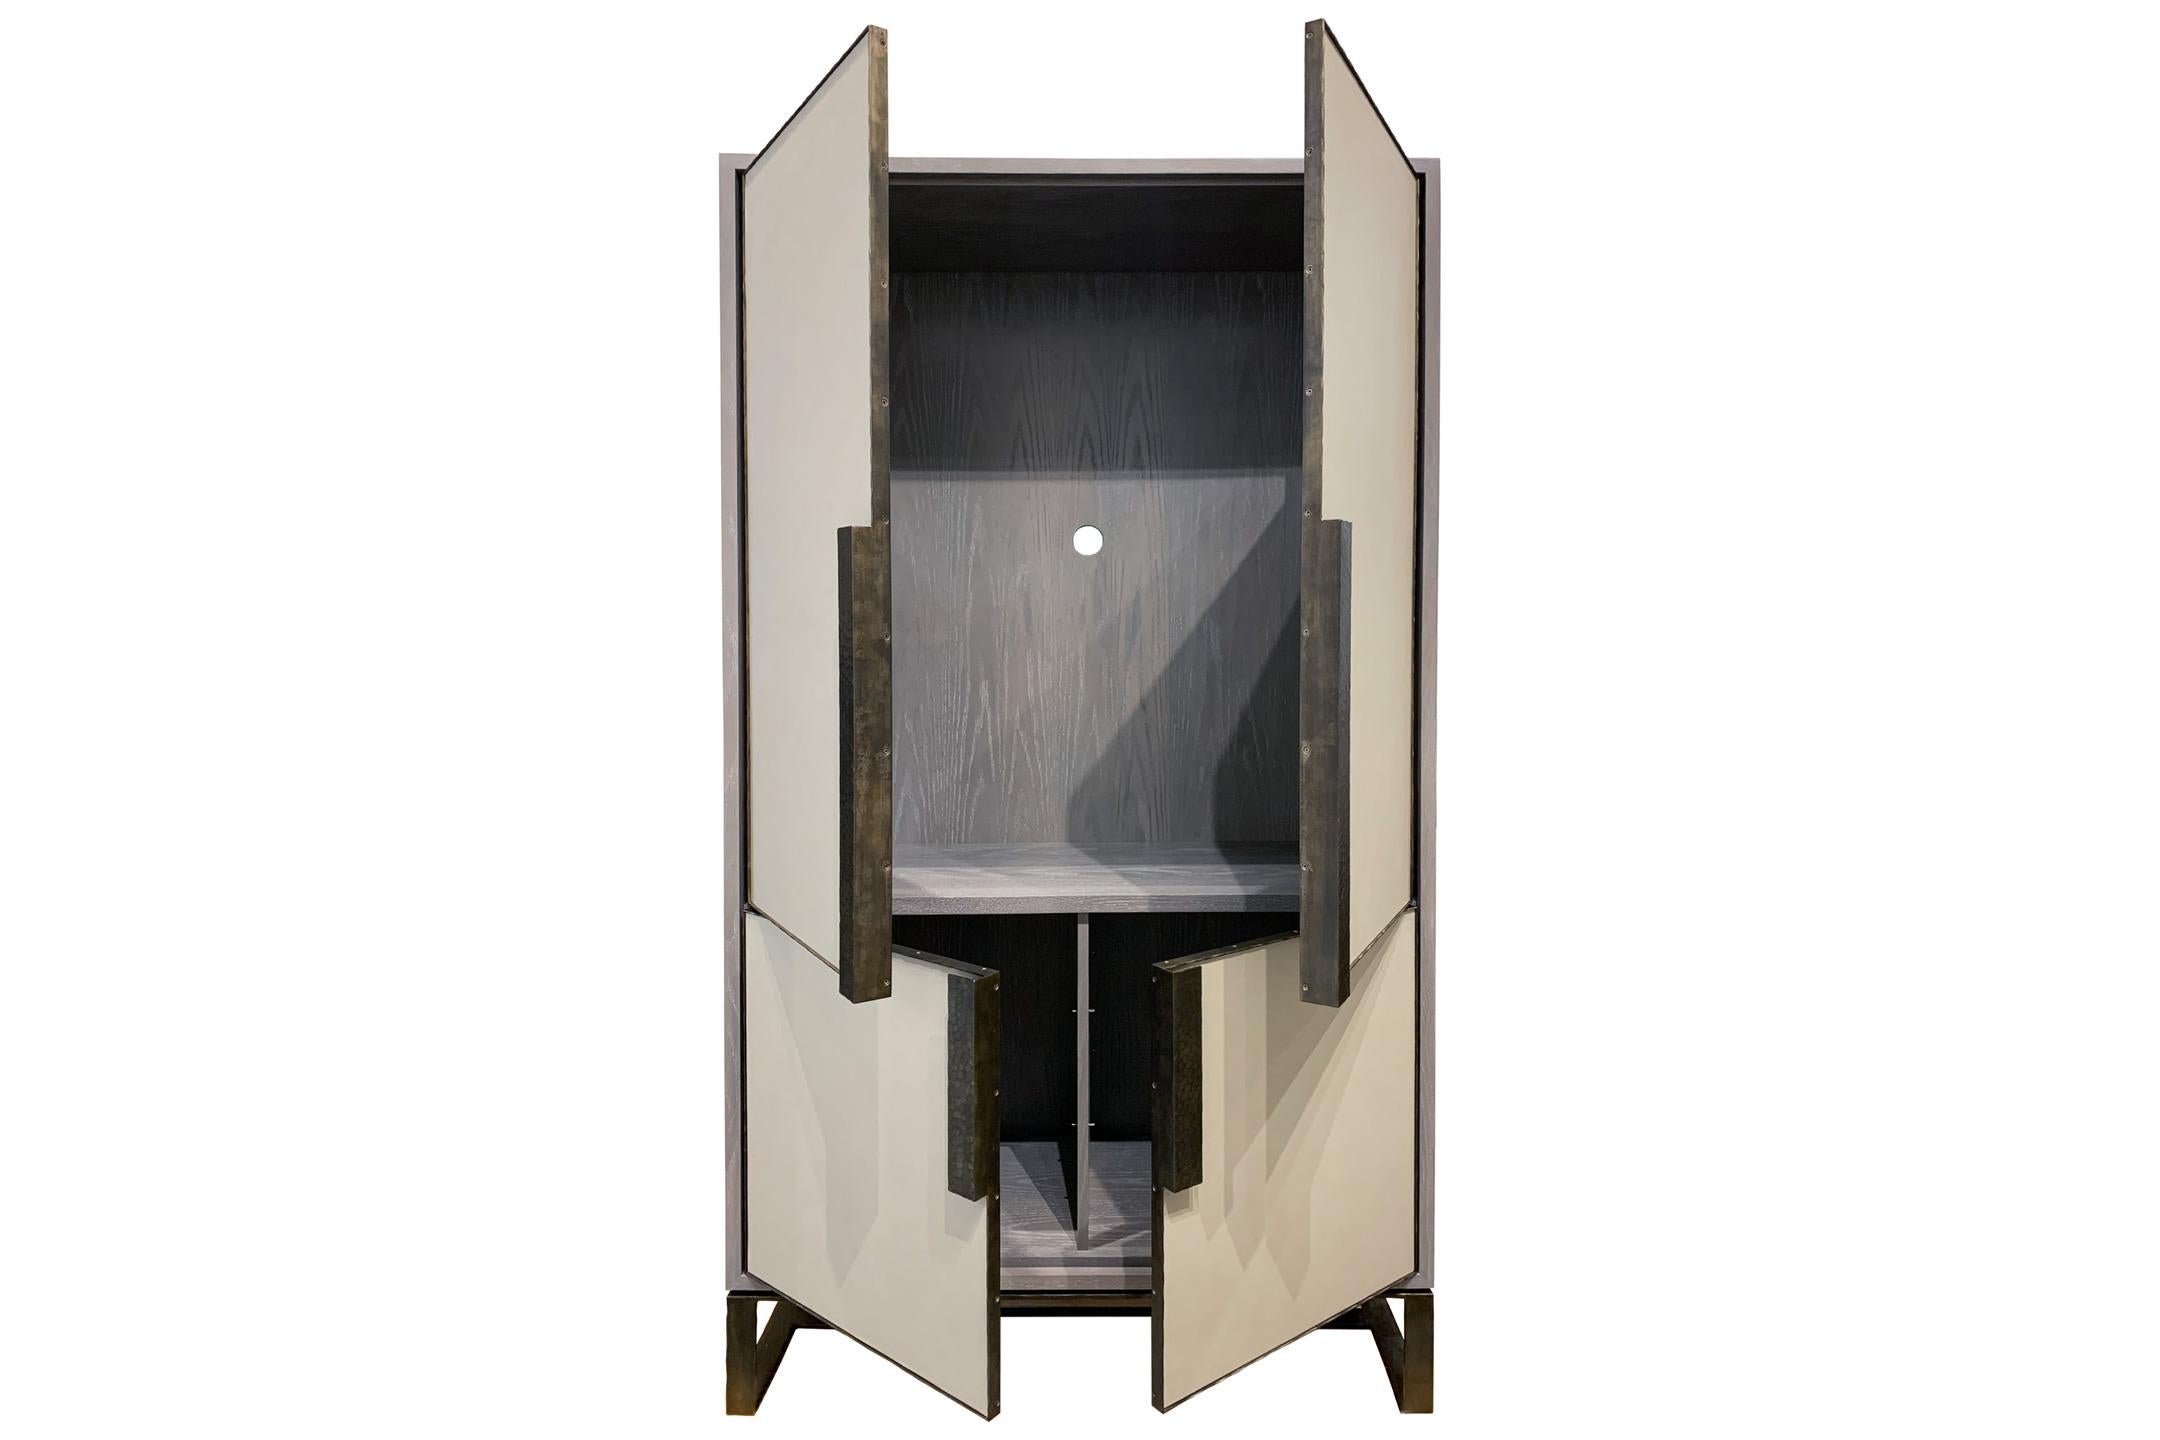 The Chelsea bar cabinet by Ercole Home has a 4-door front, with earl gray ceruse wood finish on oak.
Hand-stretched leather in Polis gray decorate the door fronts.
Hand-hammered metal framed doors, handles, and base in Dark Bronze metal